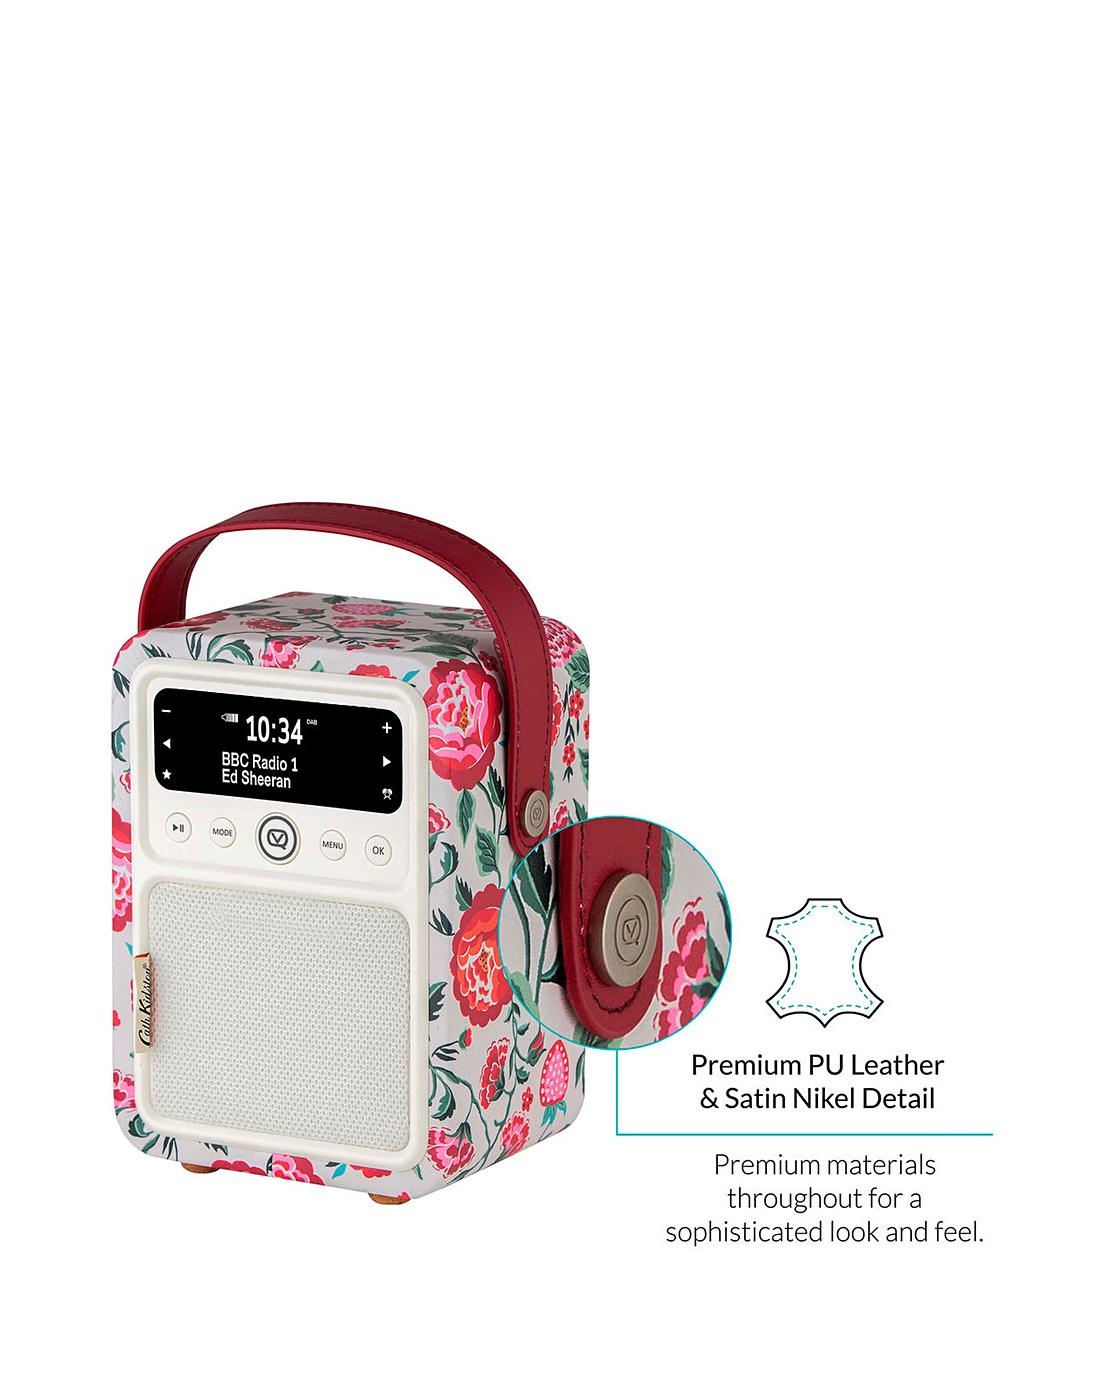 VQ Monty Portable DAB+/FM Bluetooth Radio - Cath Kidston FREE Rechargeable Battery Worth £25   FREE UK Delivery